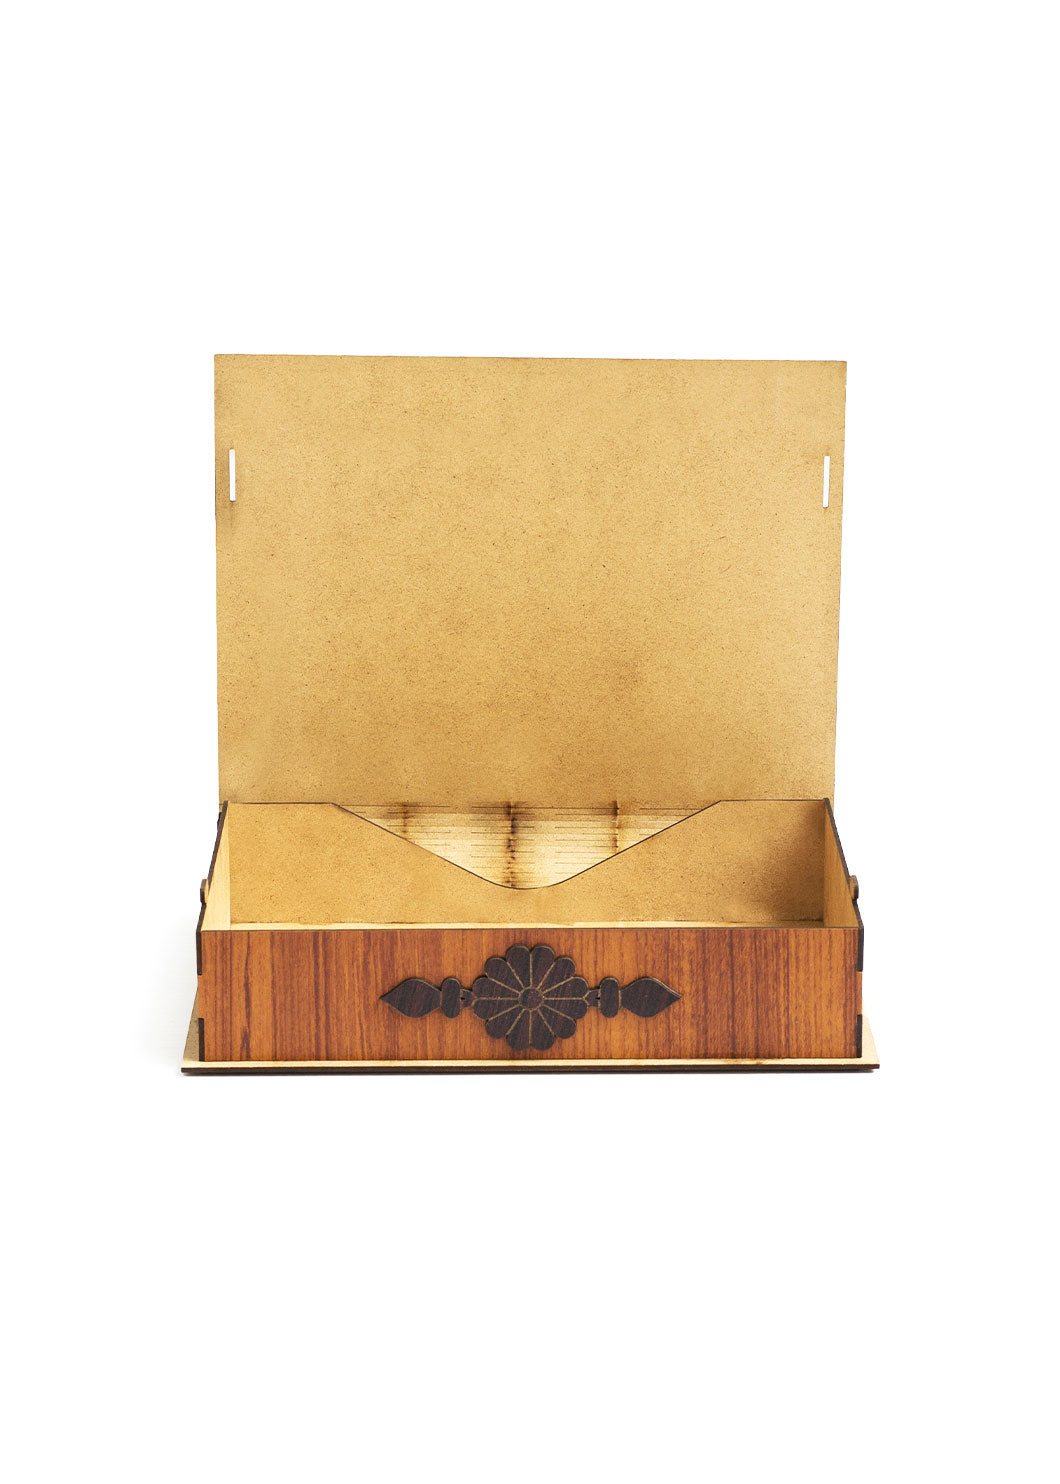 Brown And Dark Brown Wooden Box For Quran - Wooden Juzdaan - Quran Ghilaf - Premium Wooden Box - For Quran